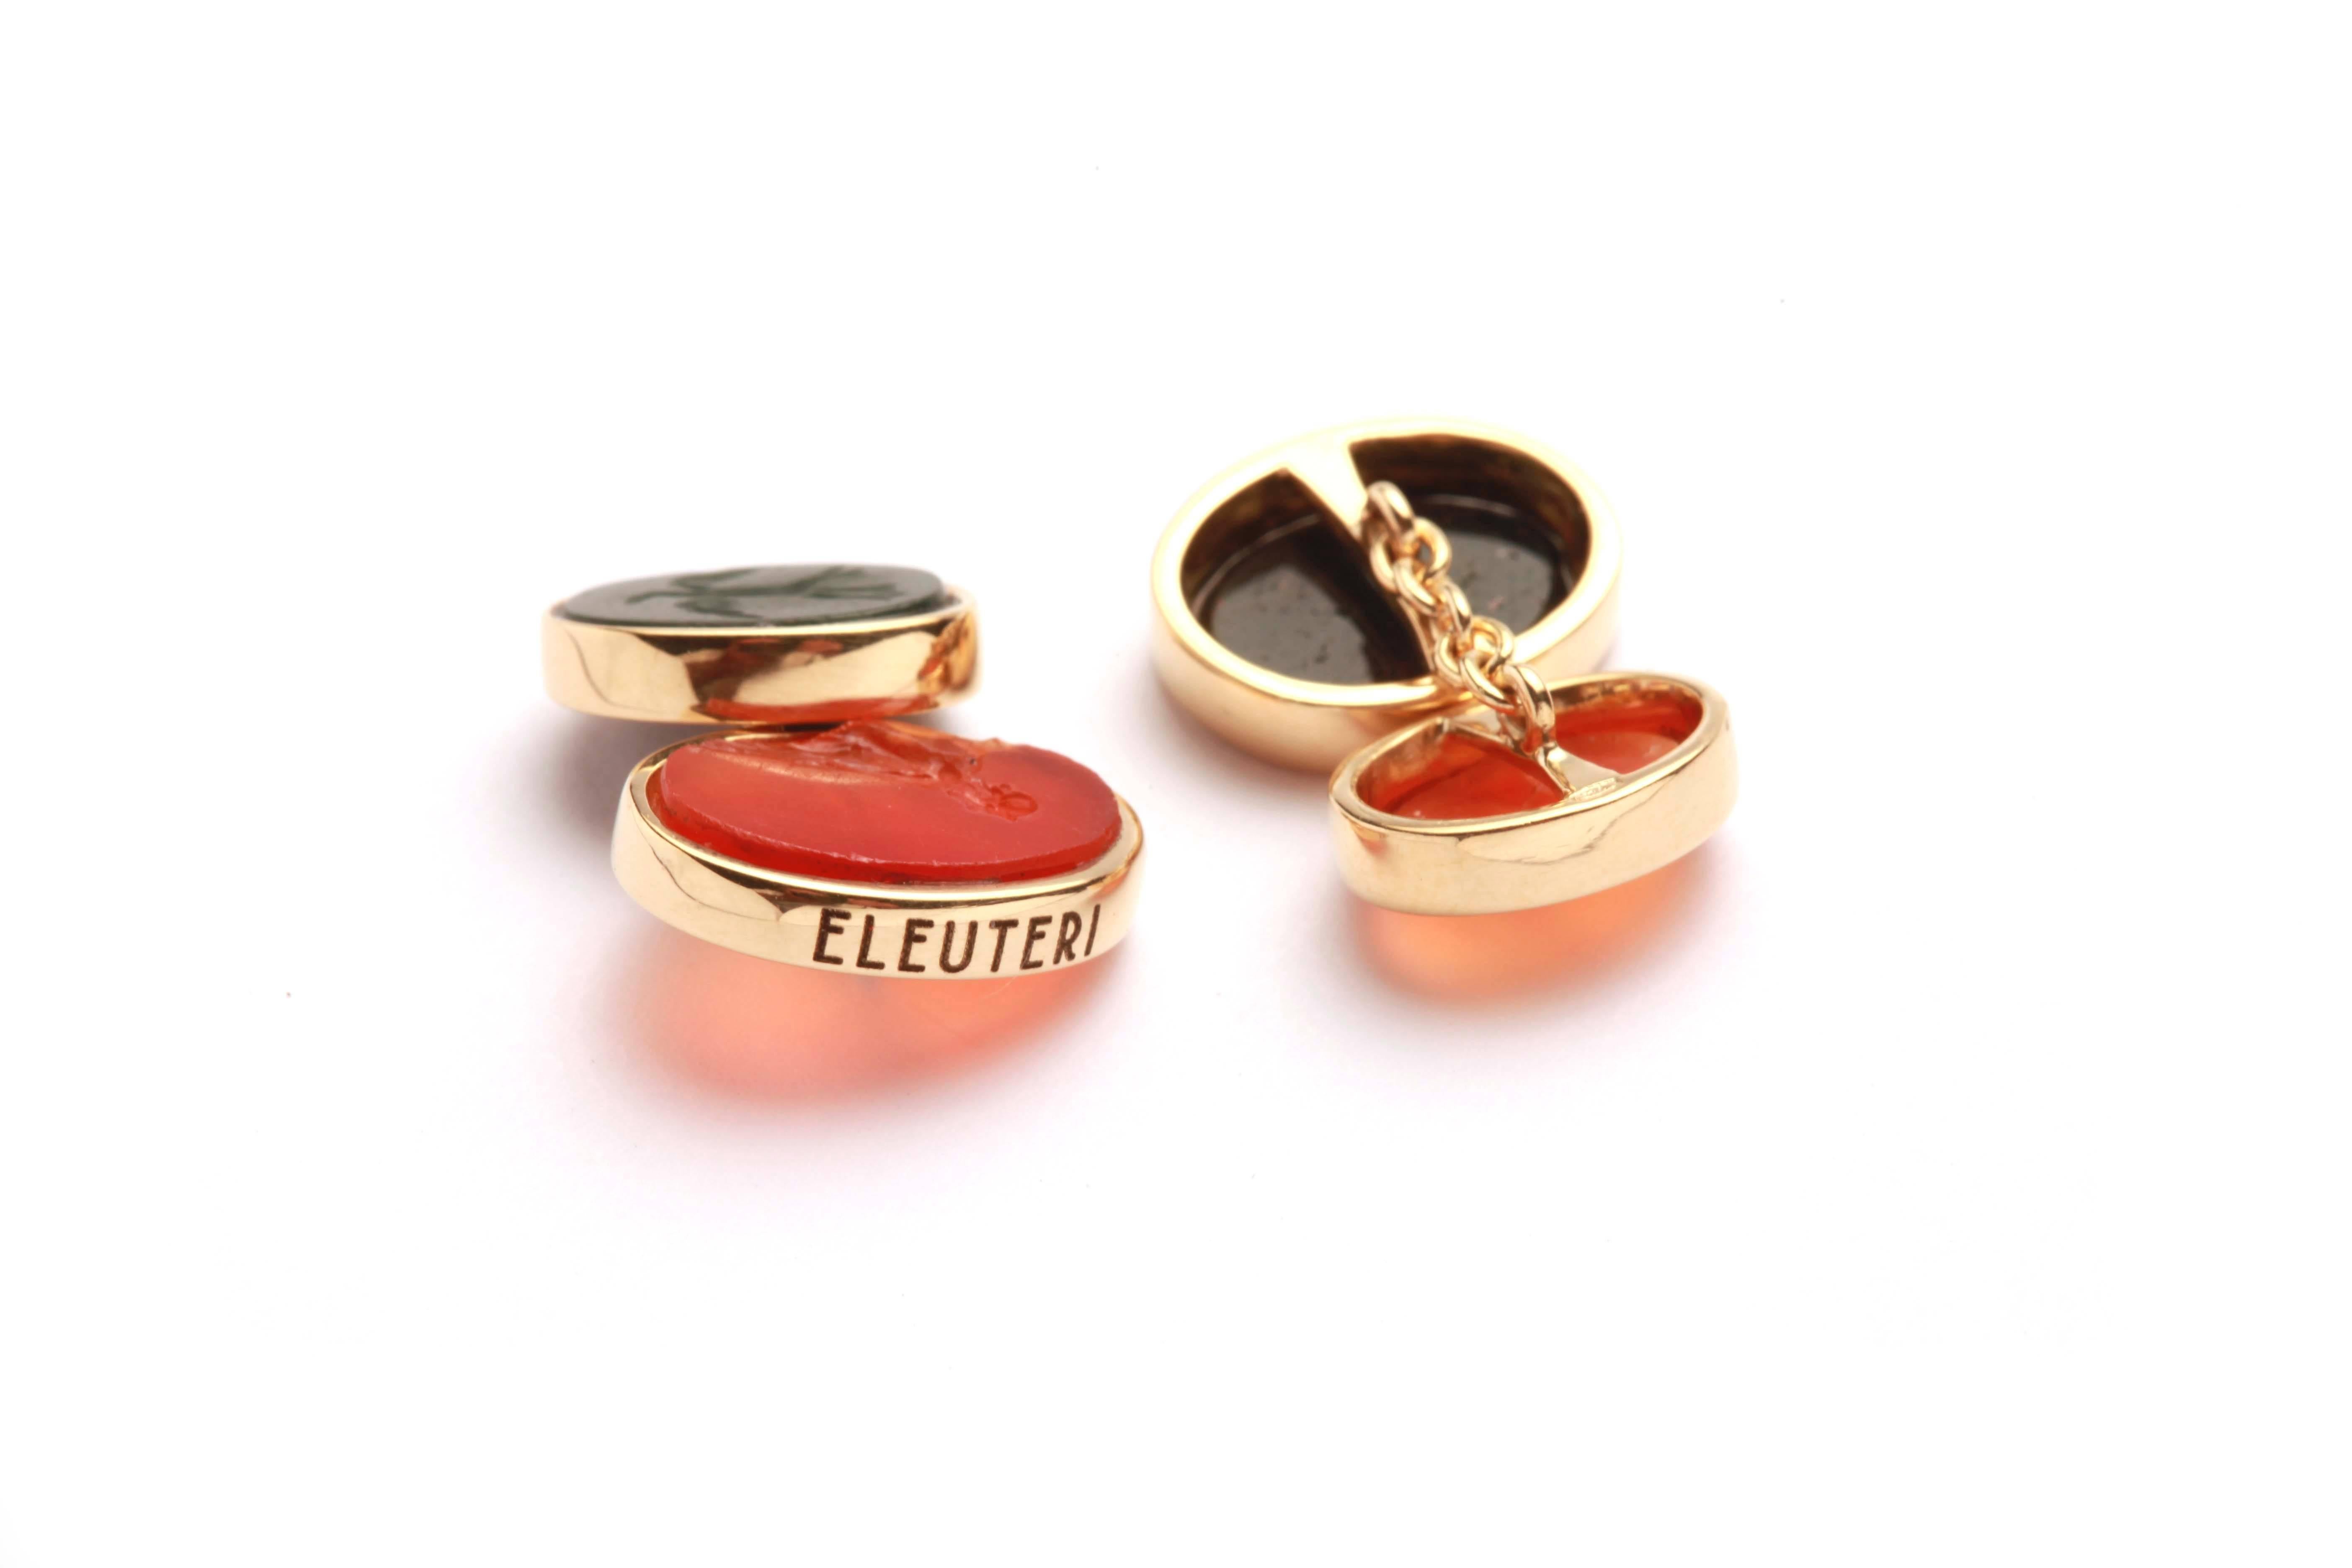 A pair of ancient Roman cornelian and diasper intaglios, resumed from archeological excavation, elegantly set in 18kt yellow gold by Eleuteri.